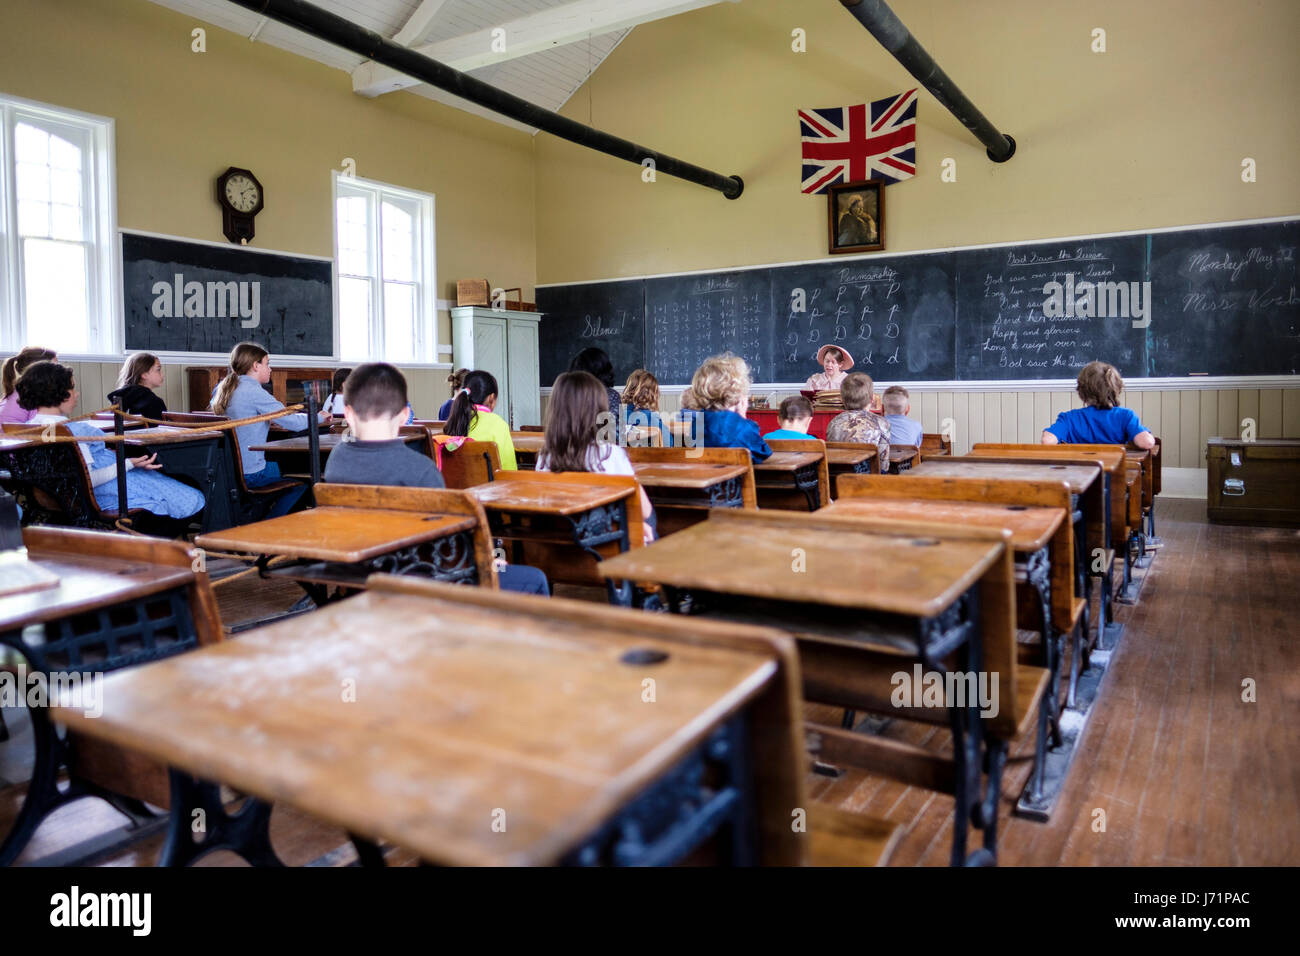 London, Ontario, Canada. 22th May, 2017. Victoria Day, a federal Canadian public holiday with celebrations in honour of Queen Victoria's birthday, also called Celebration of the Queen of England. Reenactment of a typical Victorian school day in a 1871 original school classroom at Fawshawe Pioneer Village, London, Ontario, Canada. Credit: Rubens Alarcon/Alamy Live News Stock Photo